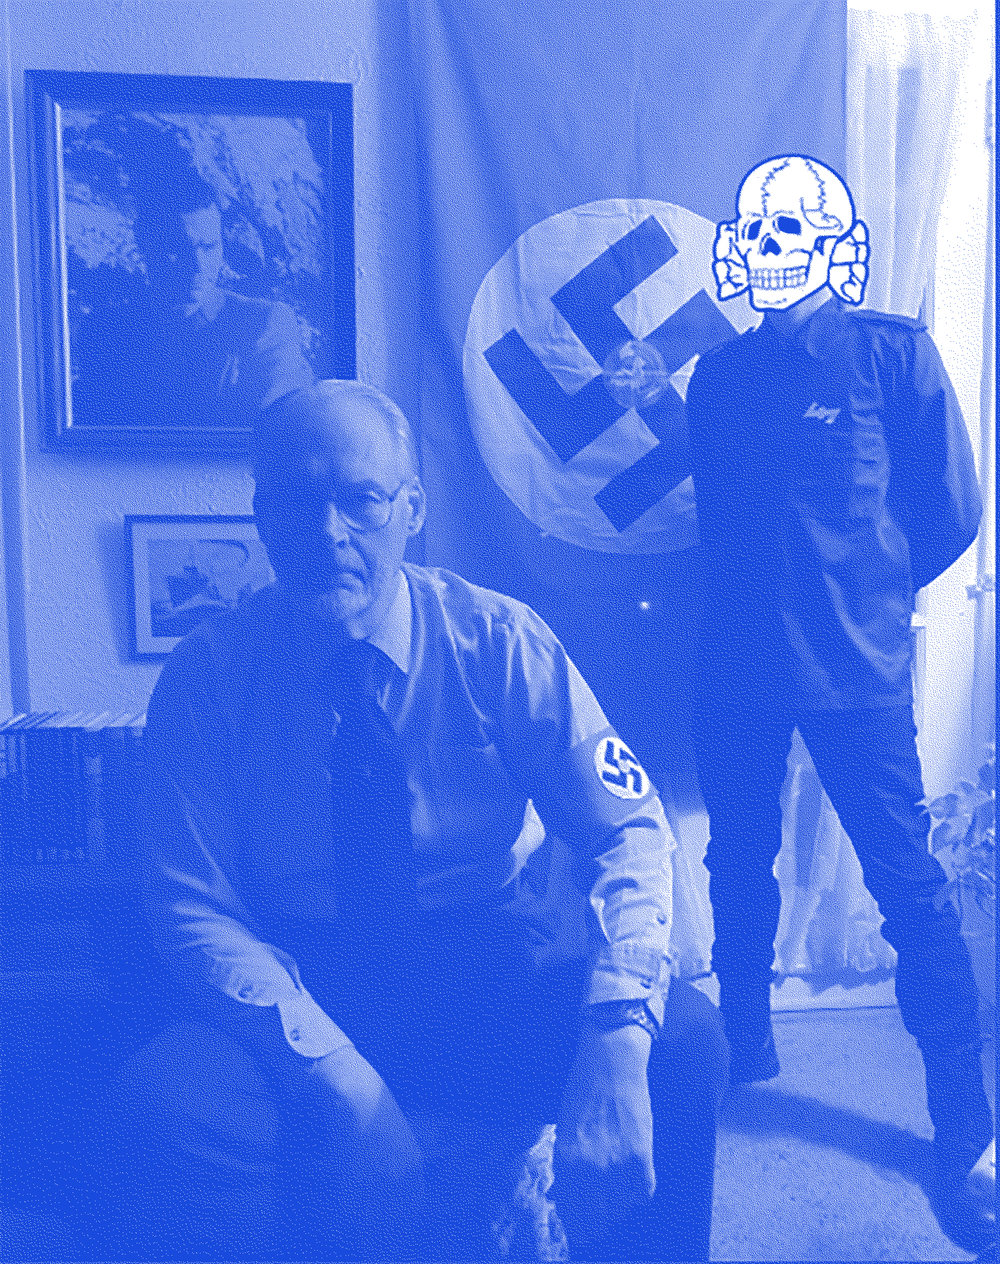 James Mason with an unidentified member of  Atomwaffen.